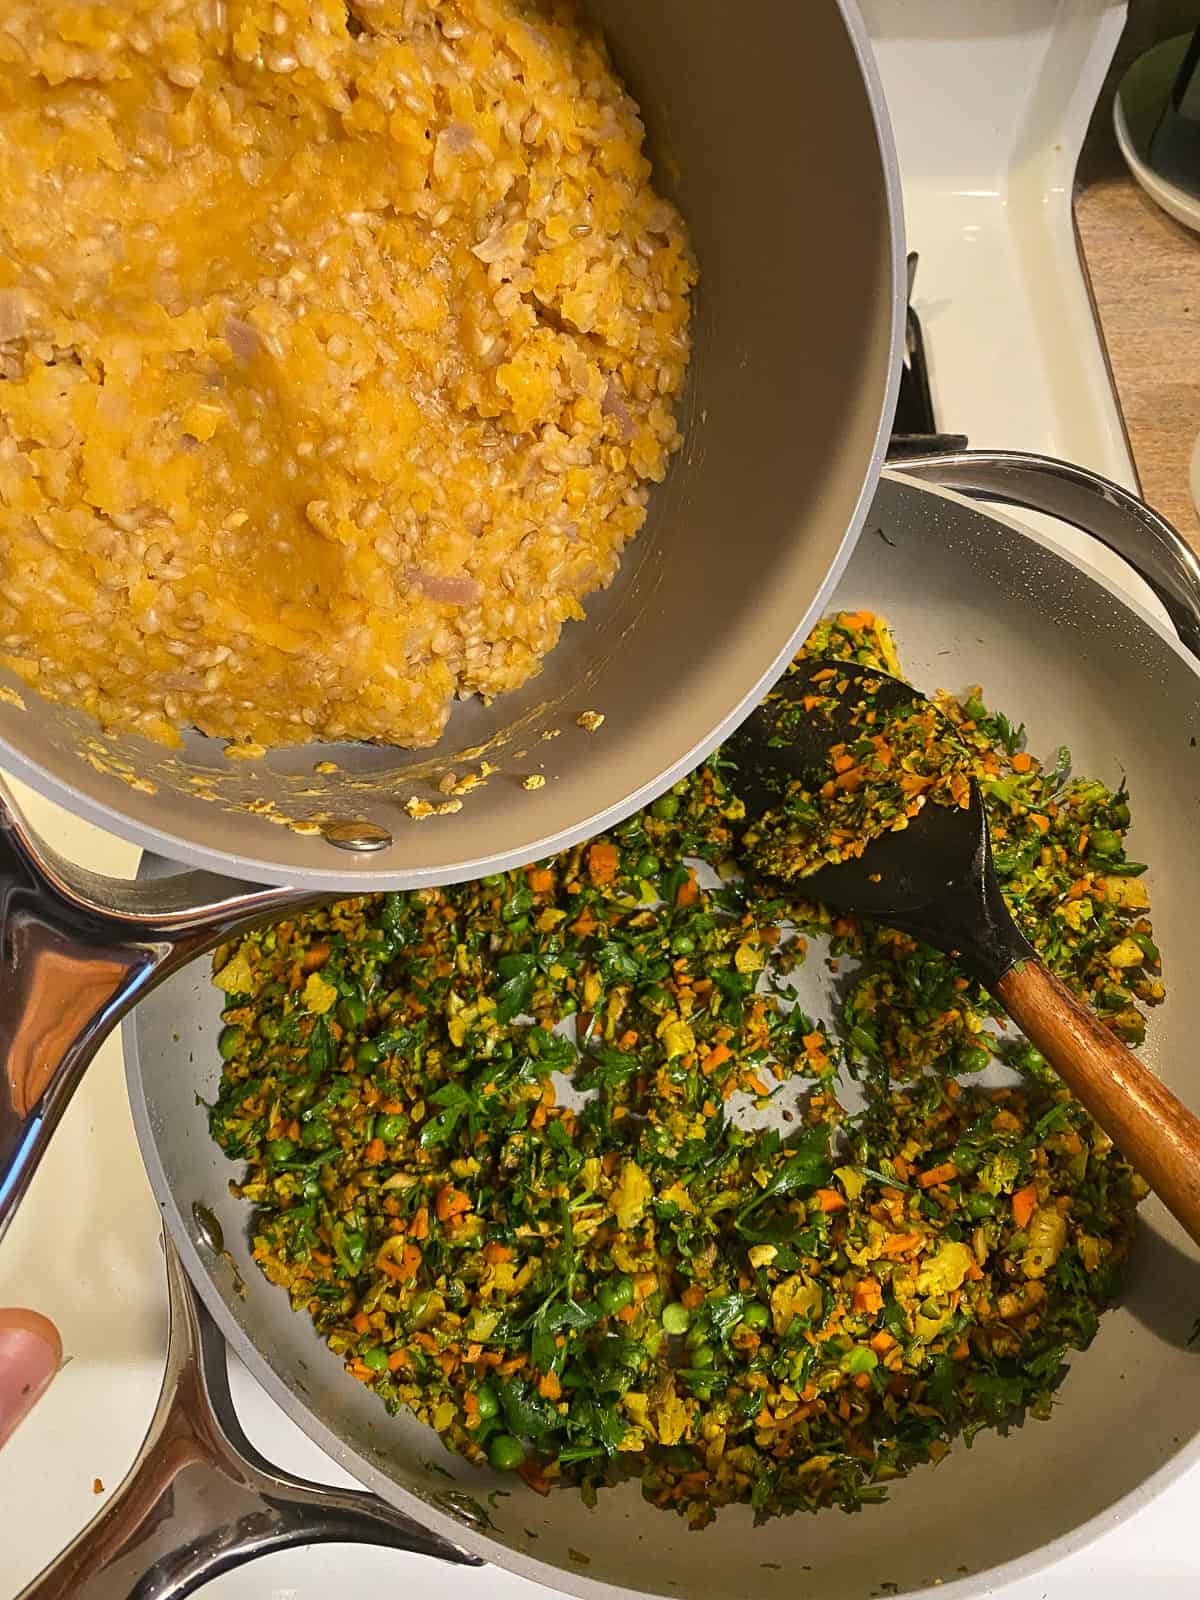 Process shot of adding a lentil and rice mixture to the pan